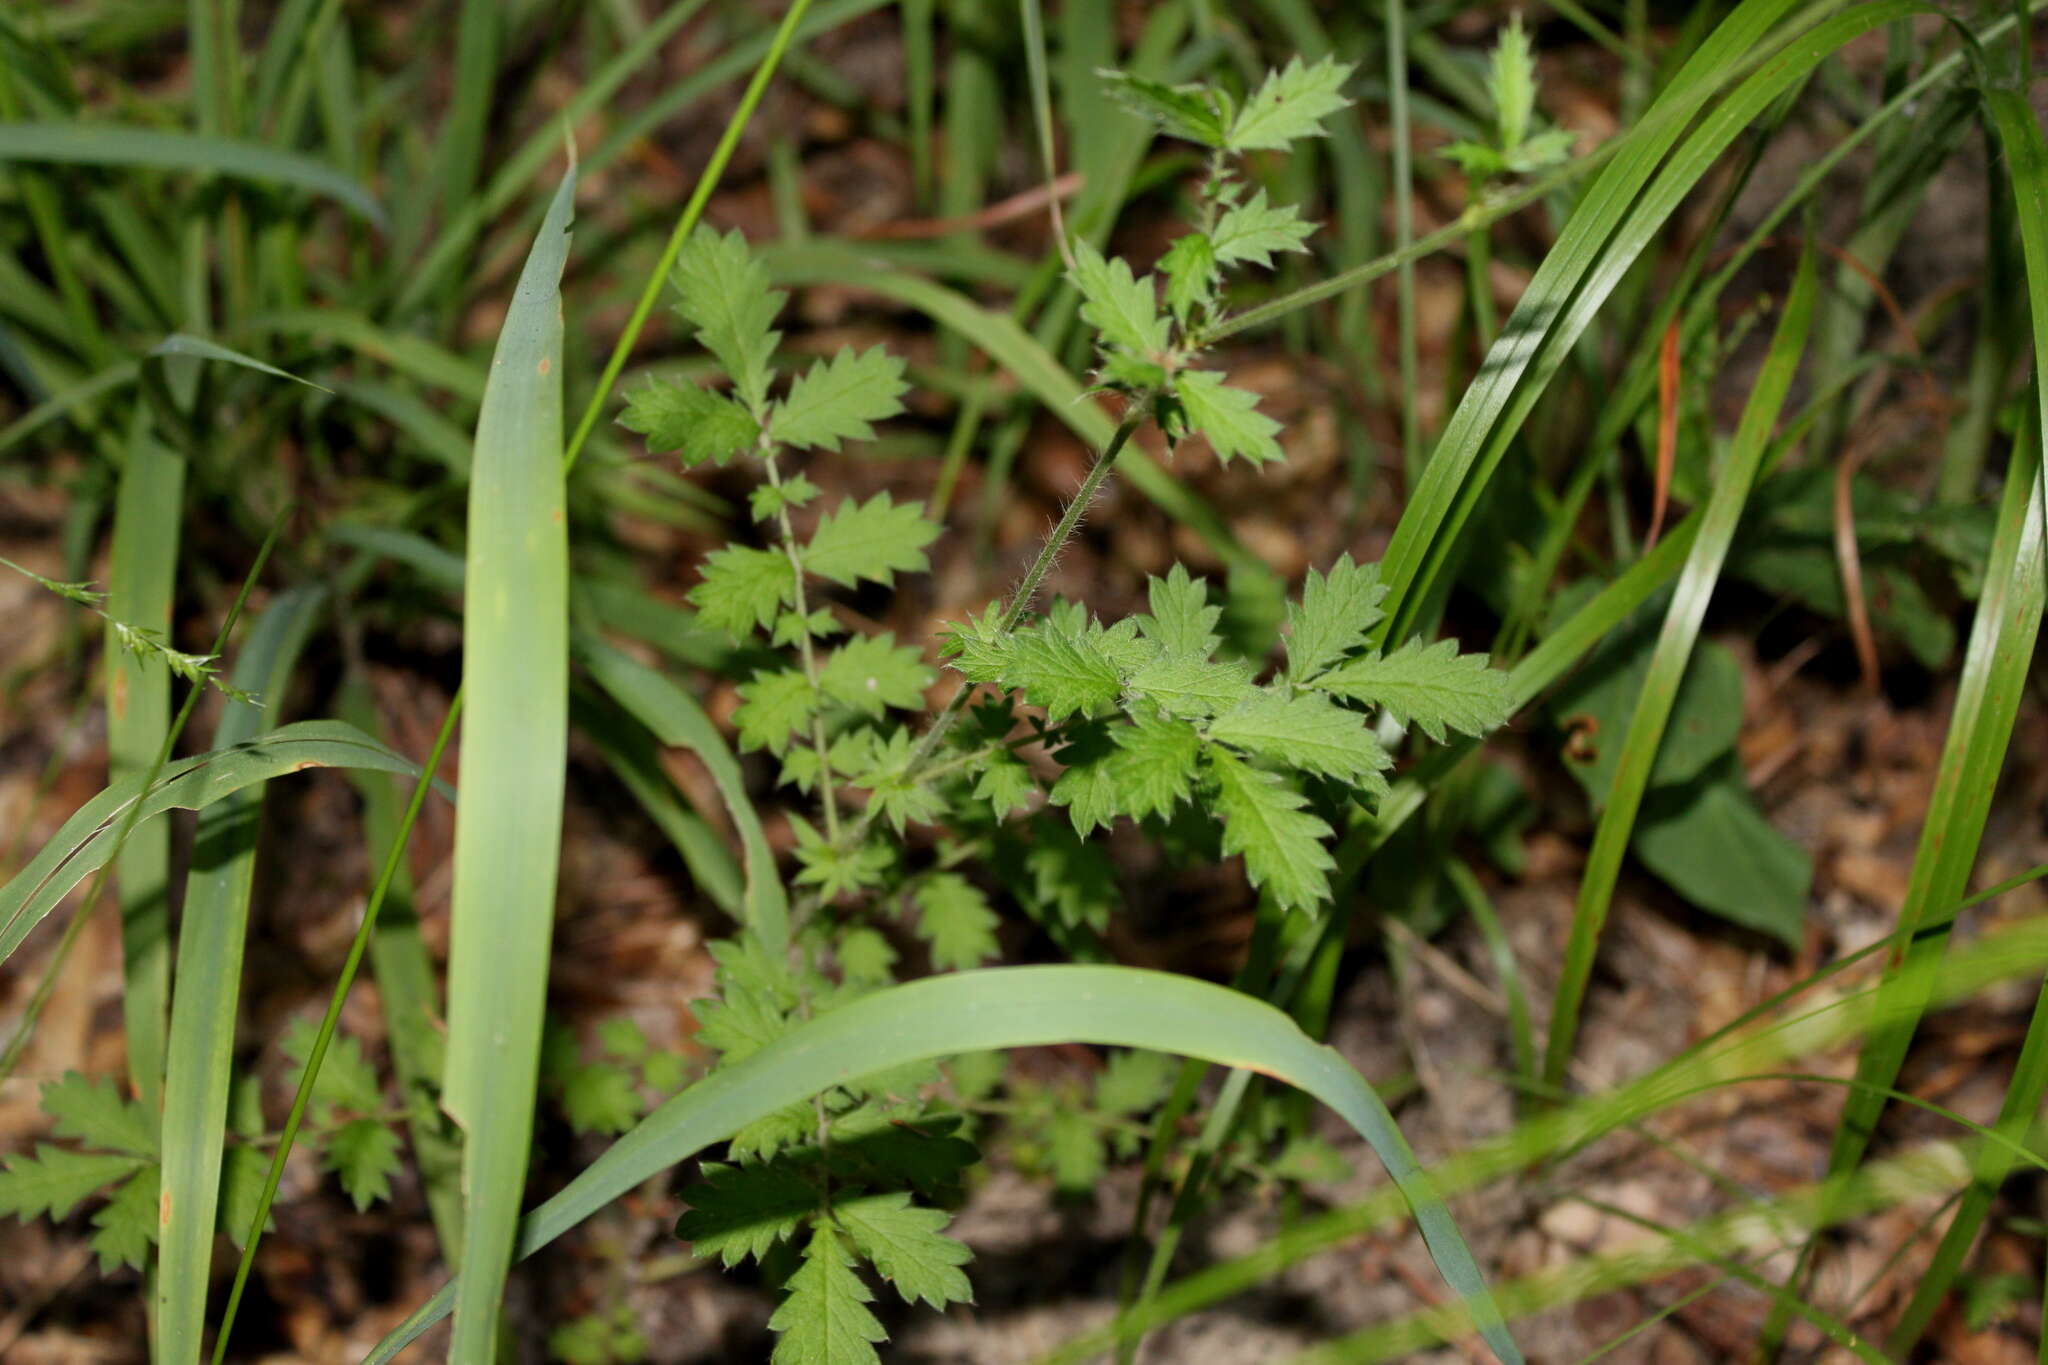 Image of incised agrimony